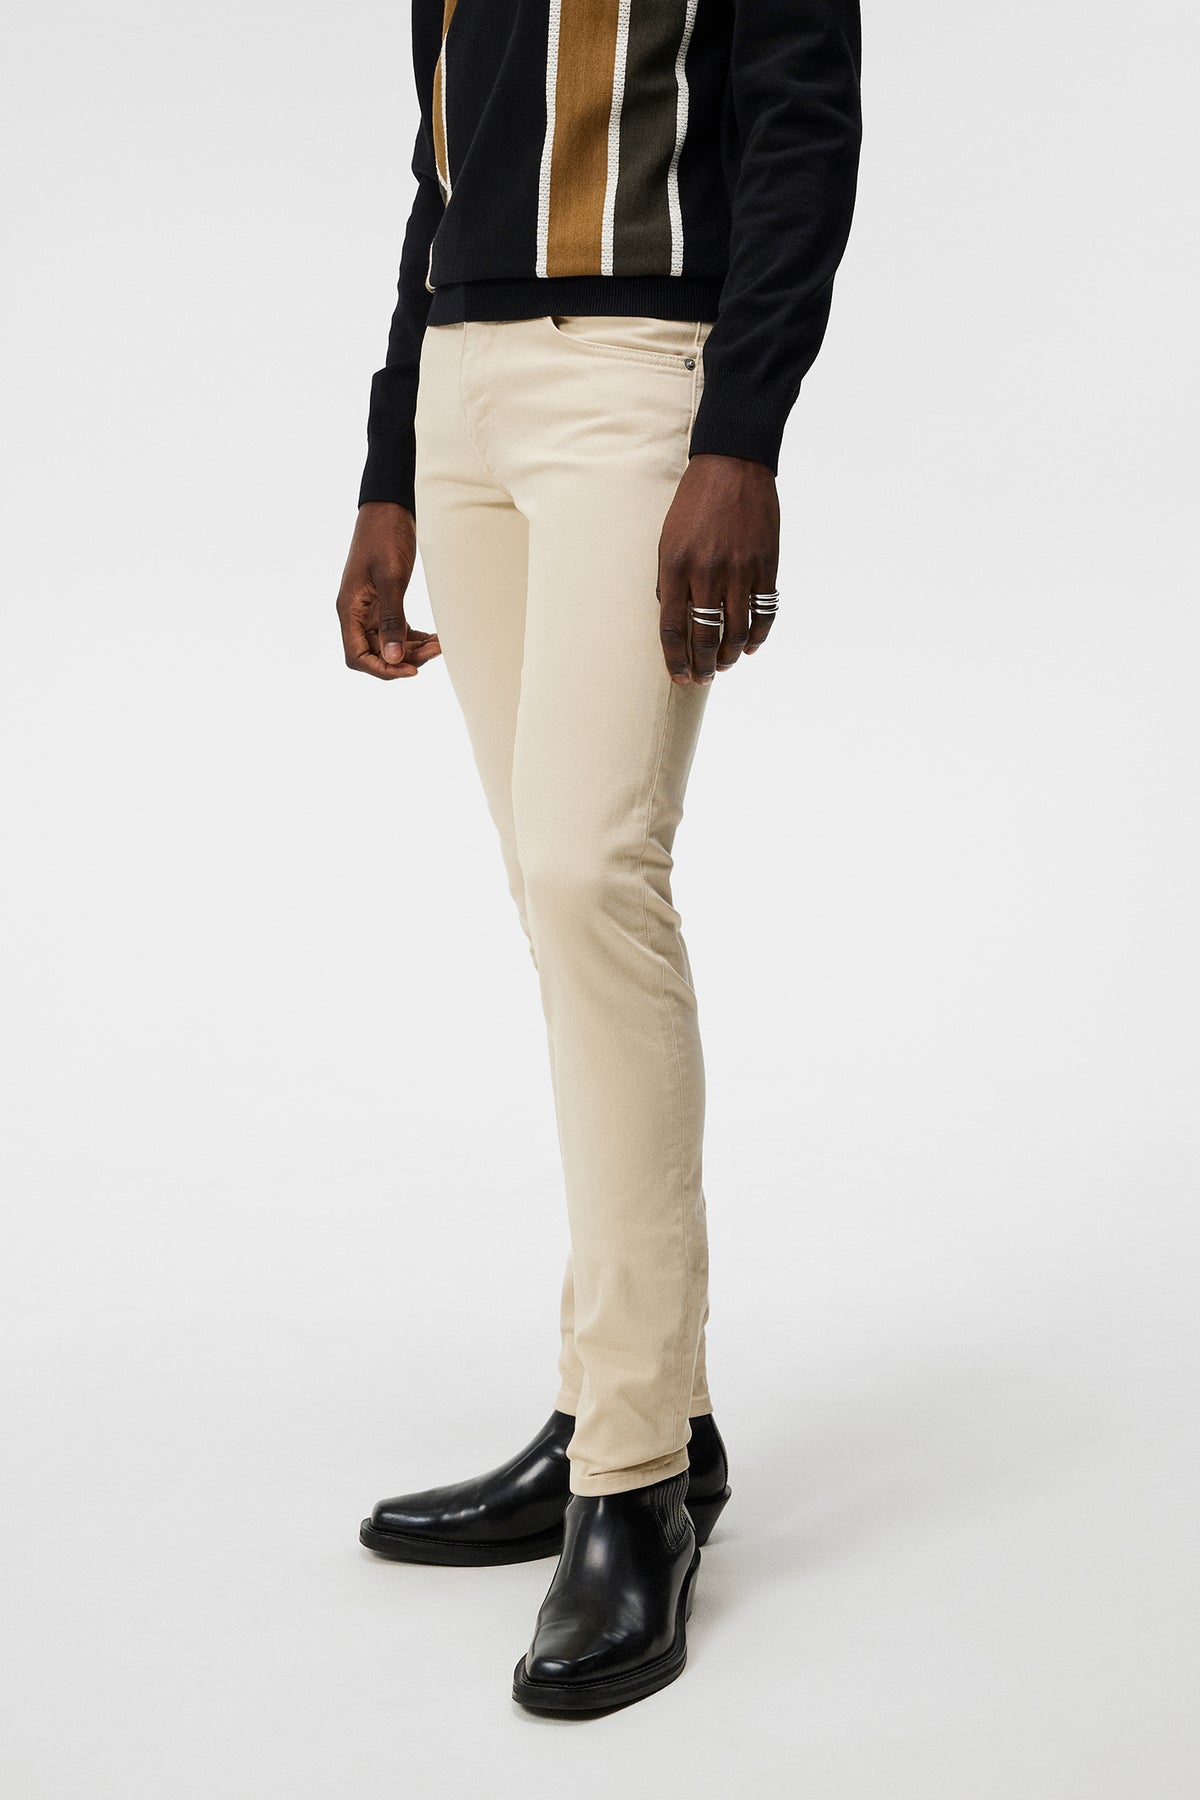 Jay Solid Stretch Jeans / Oyster Gray